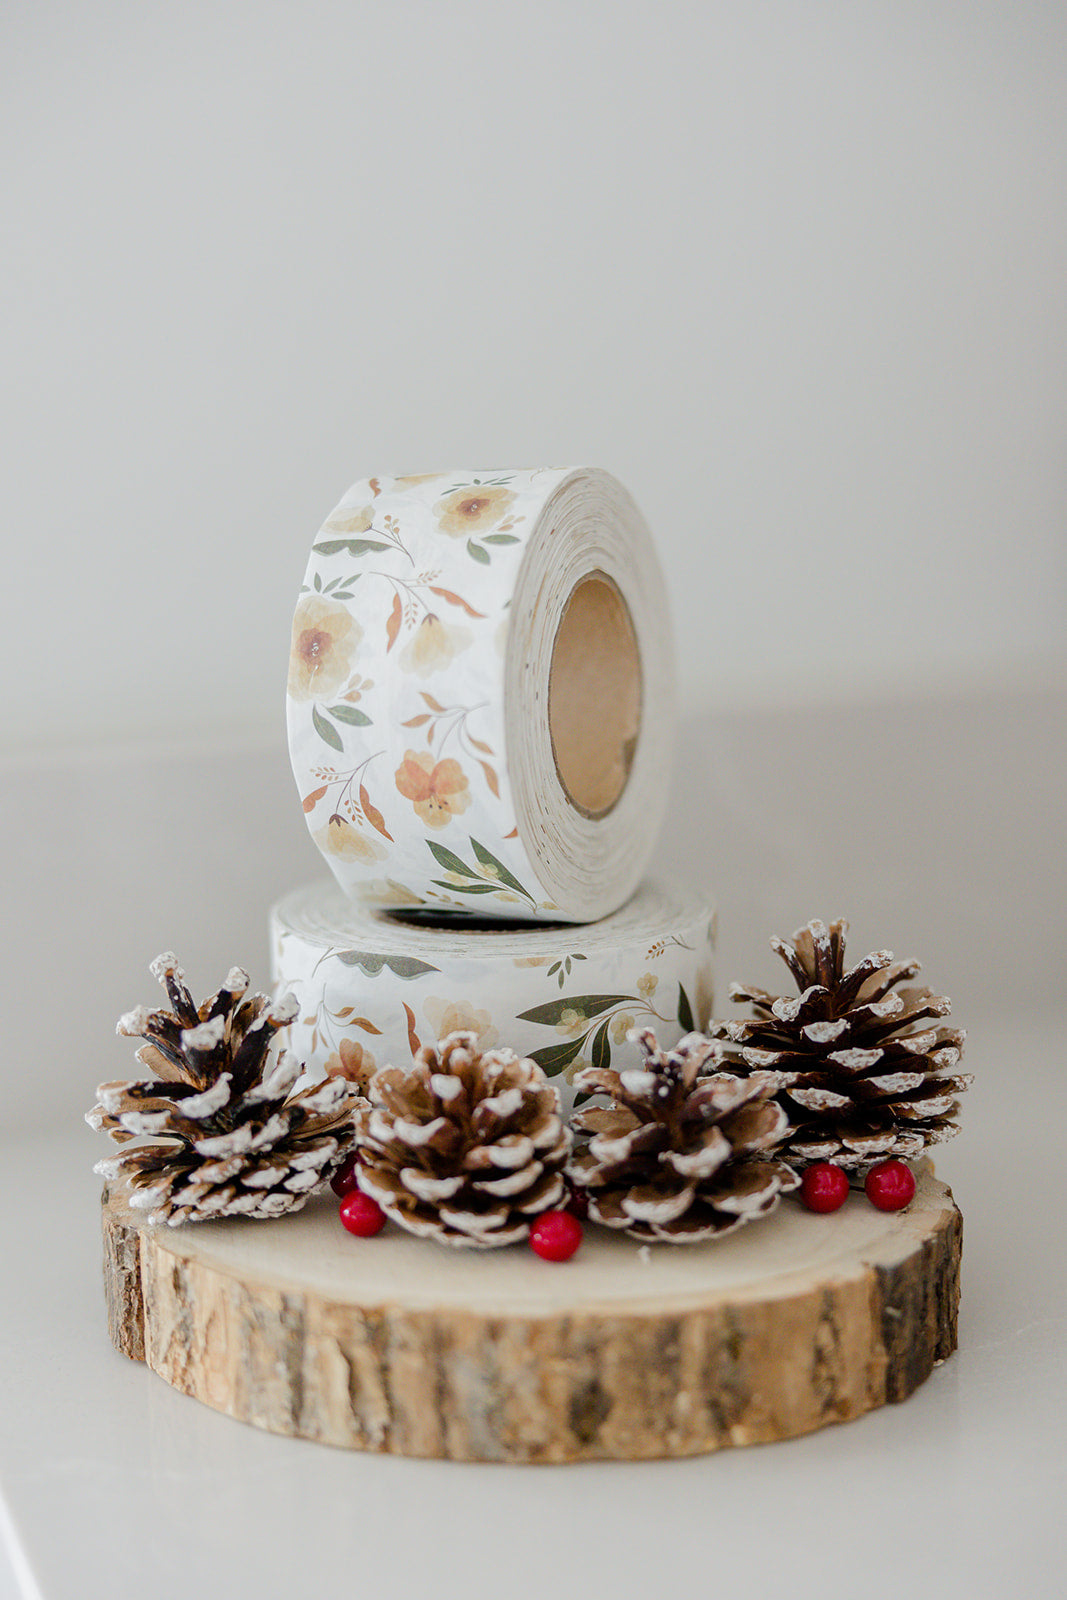 A roll of Packing Tape - Camelia Bloom with pine cones on top.